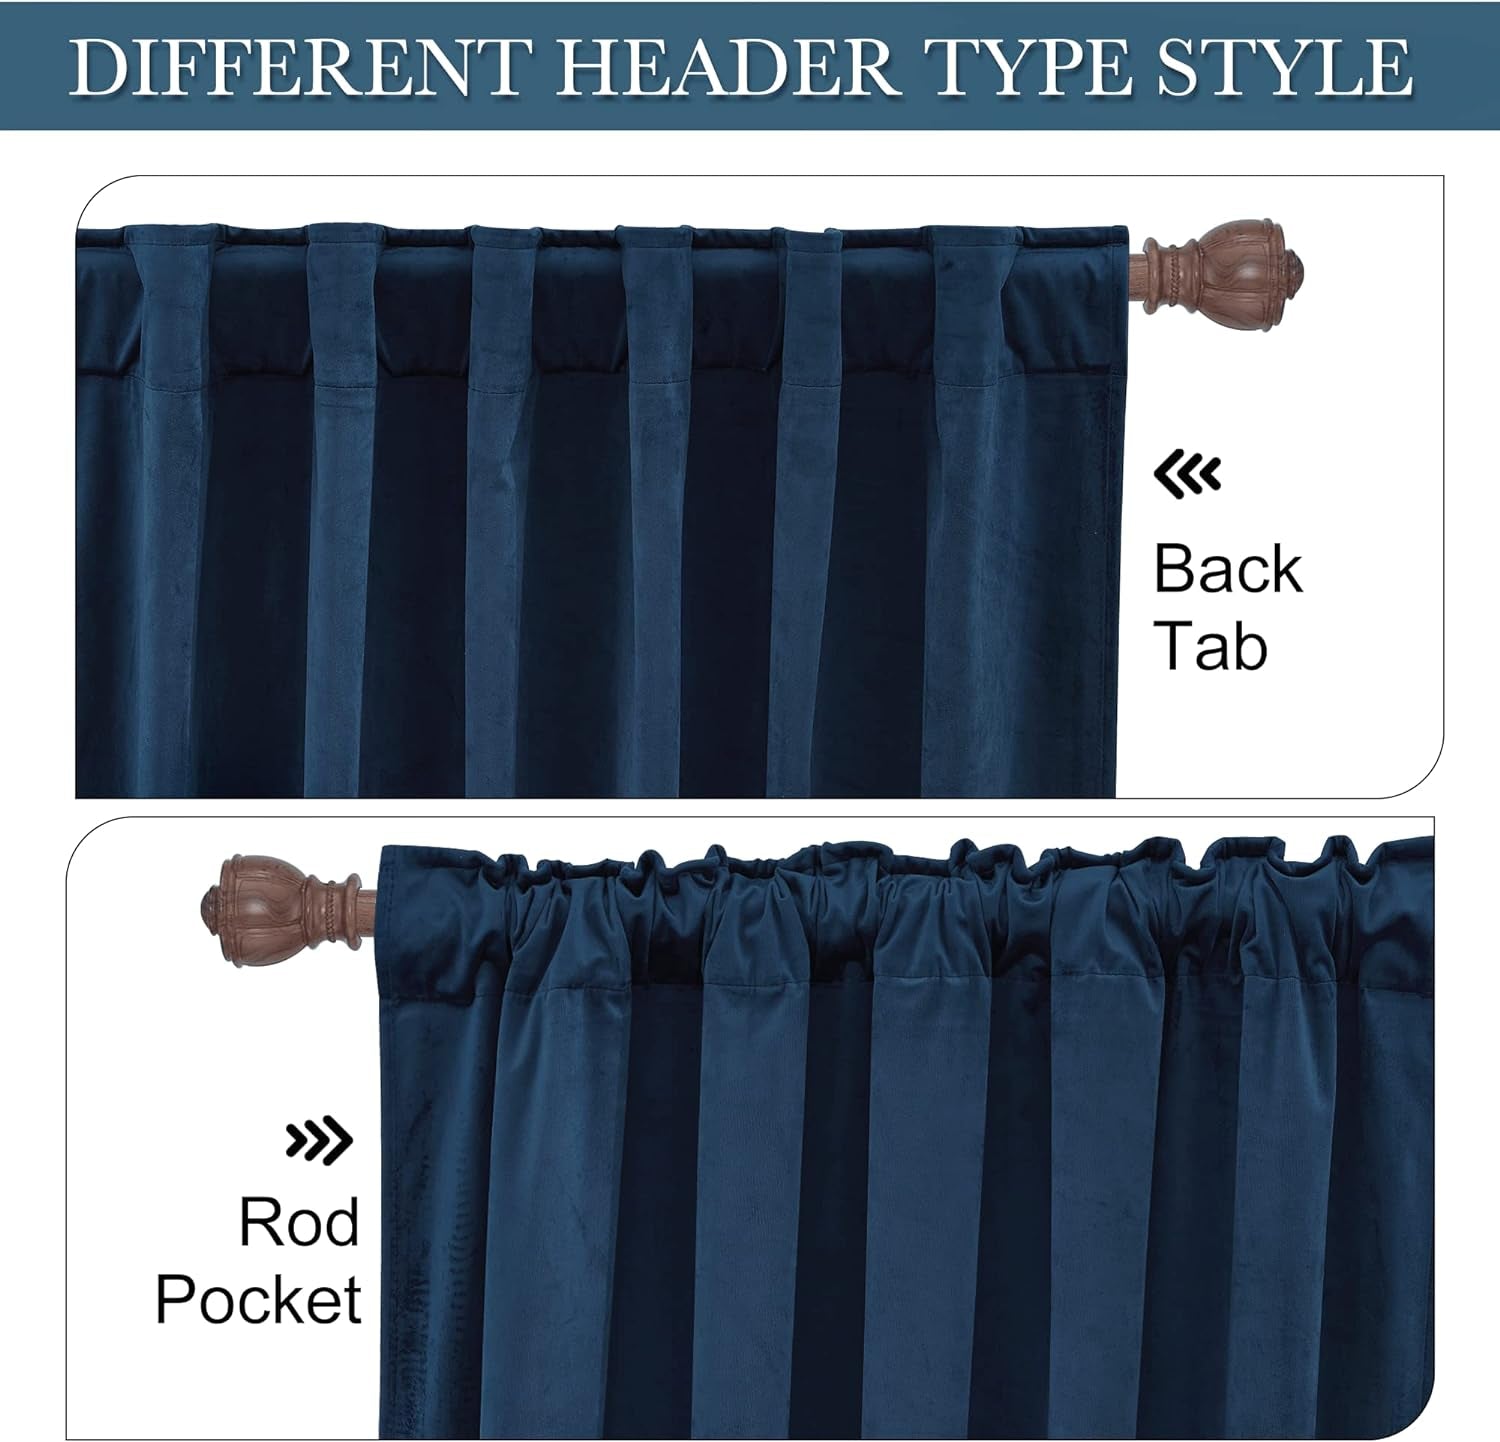 RYB HOME Blue Velvet Curtains 84 Inches- Blackout Curtains for Living Room, Thermal Insulated Noise Reducing Panels Soft Luxury Window Decor for Kids Bedroom, Navy Blue, W52 X L84 Inches, 2 Panels  RYB HOME   